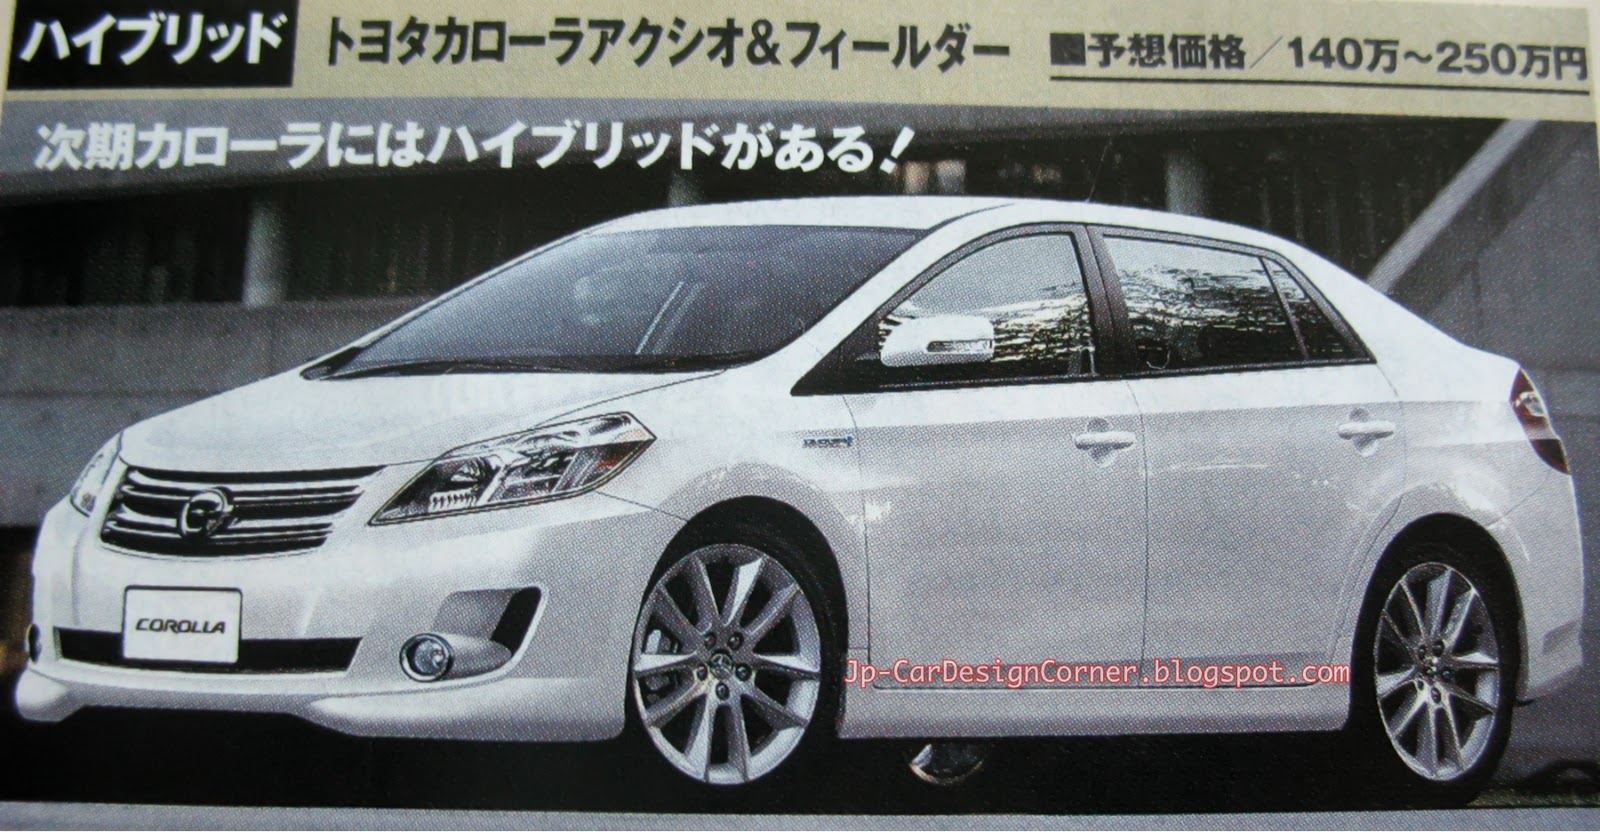 When is the new toyota corolla coming out